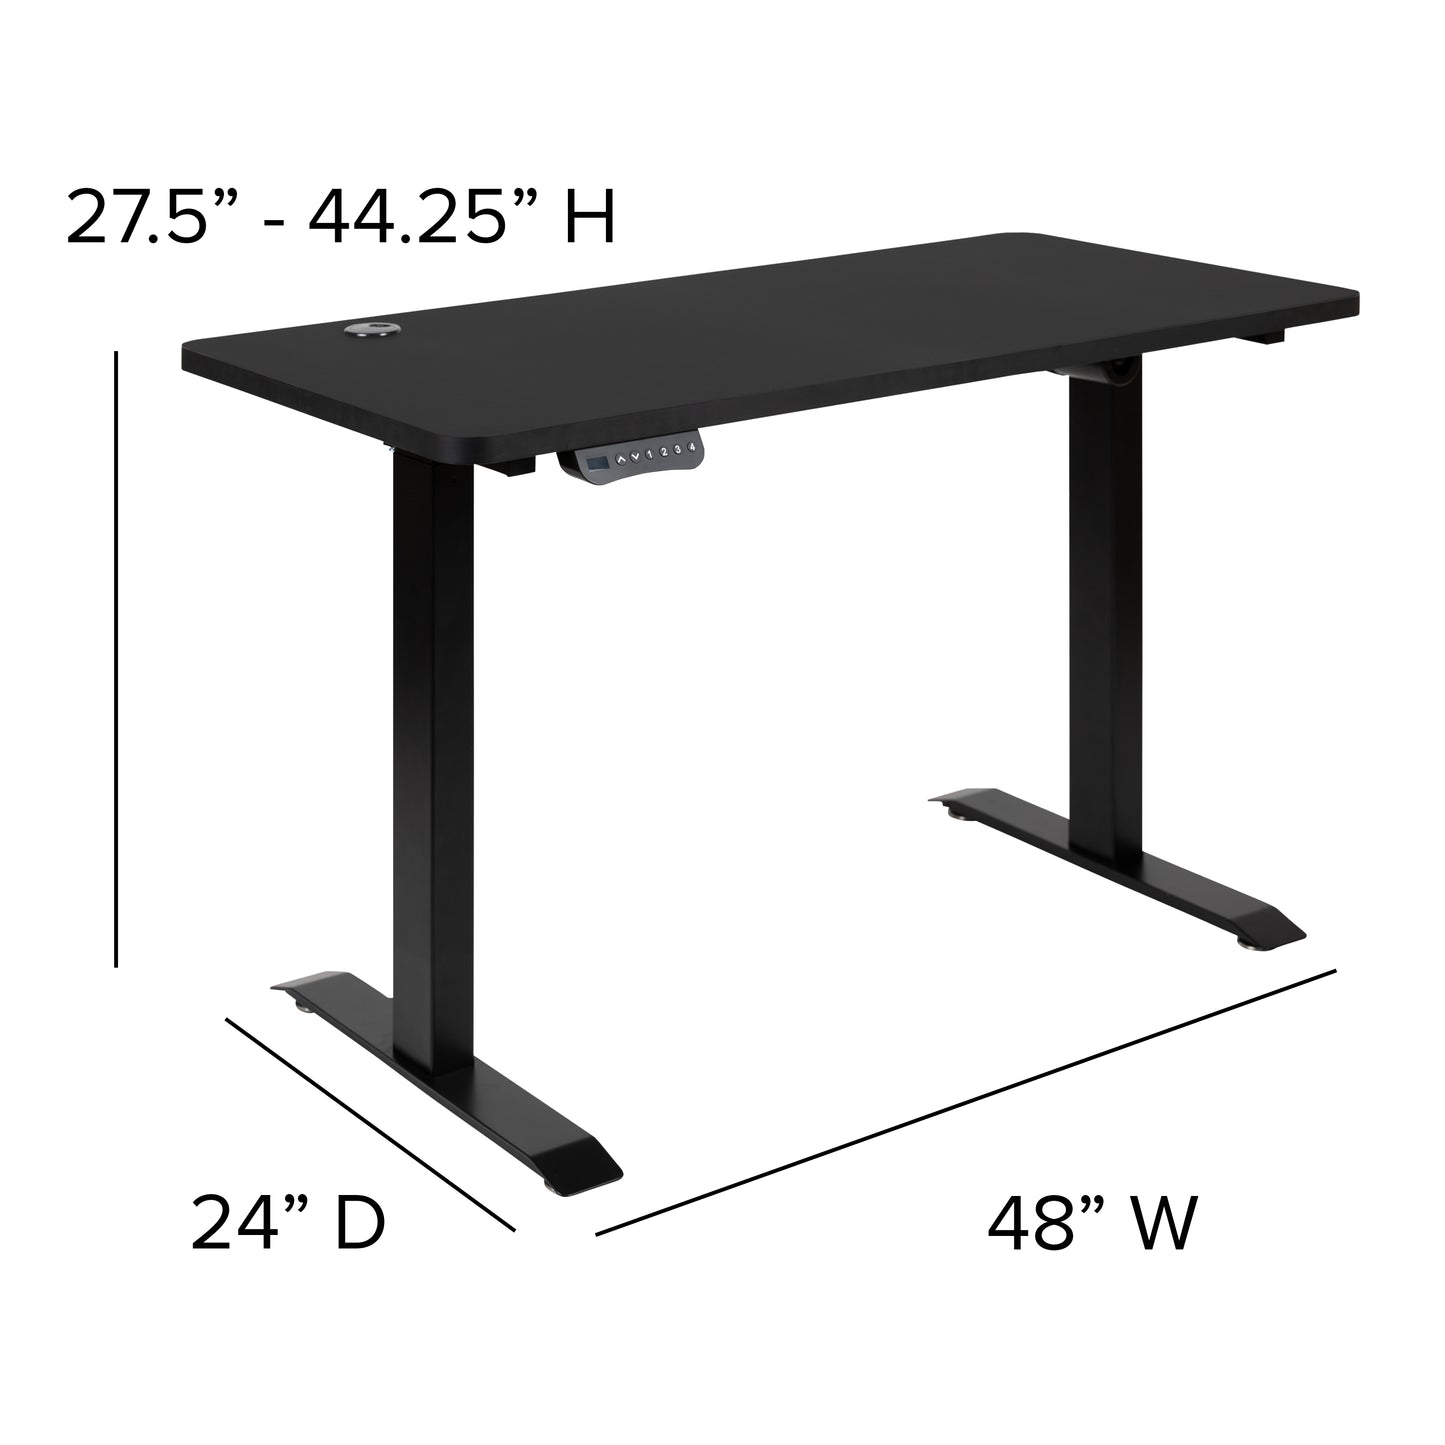 Adjustable Desk with Ergonomic Office Chair